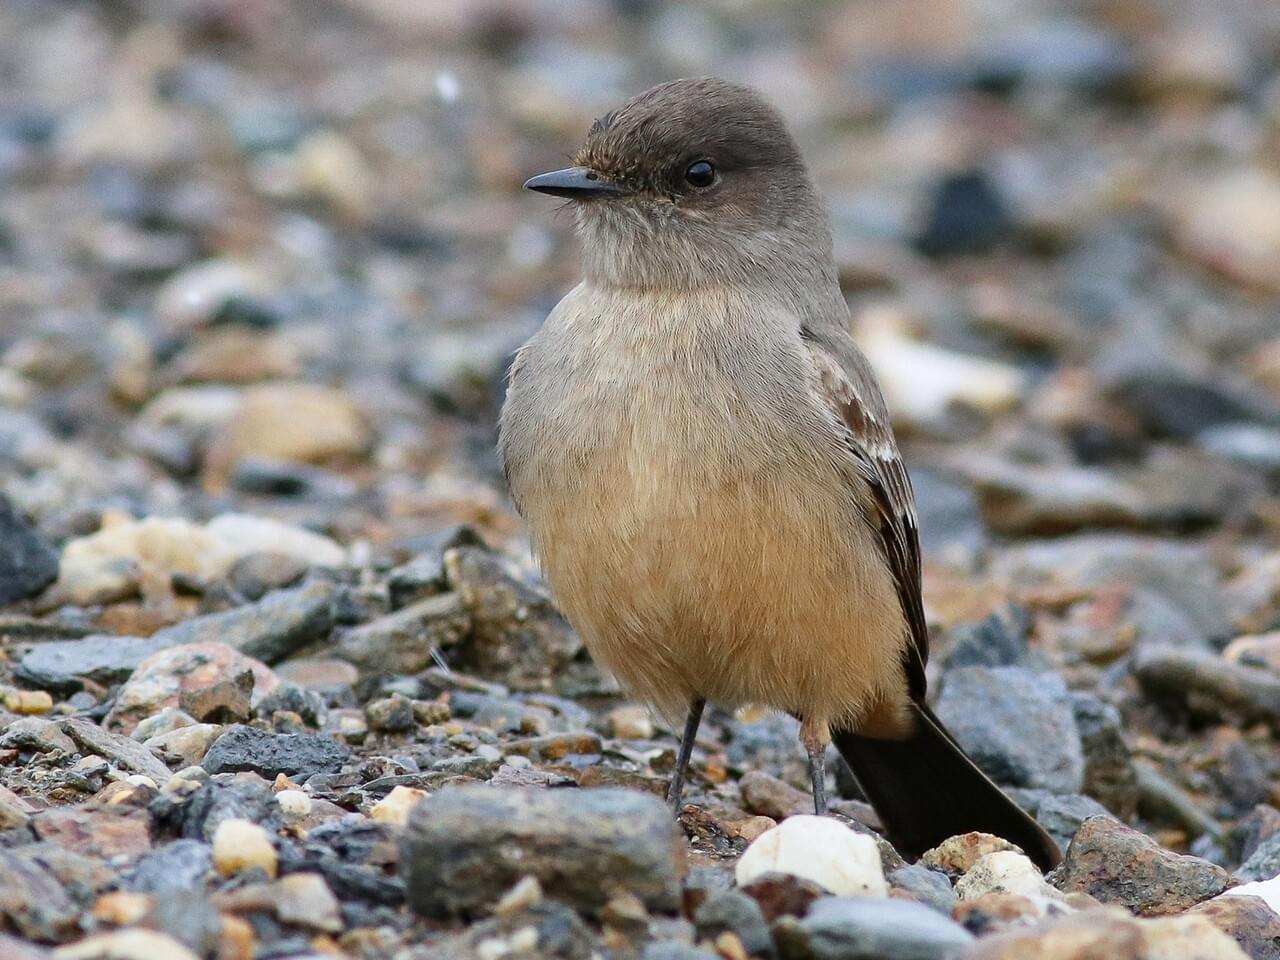 Grey, buff, and rufous-colored songbird with black beak stands on pebbled ground.